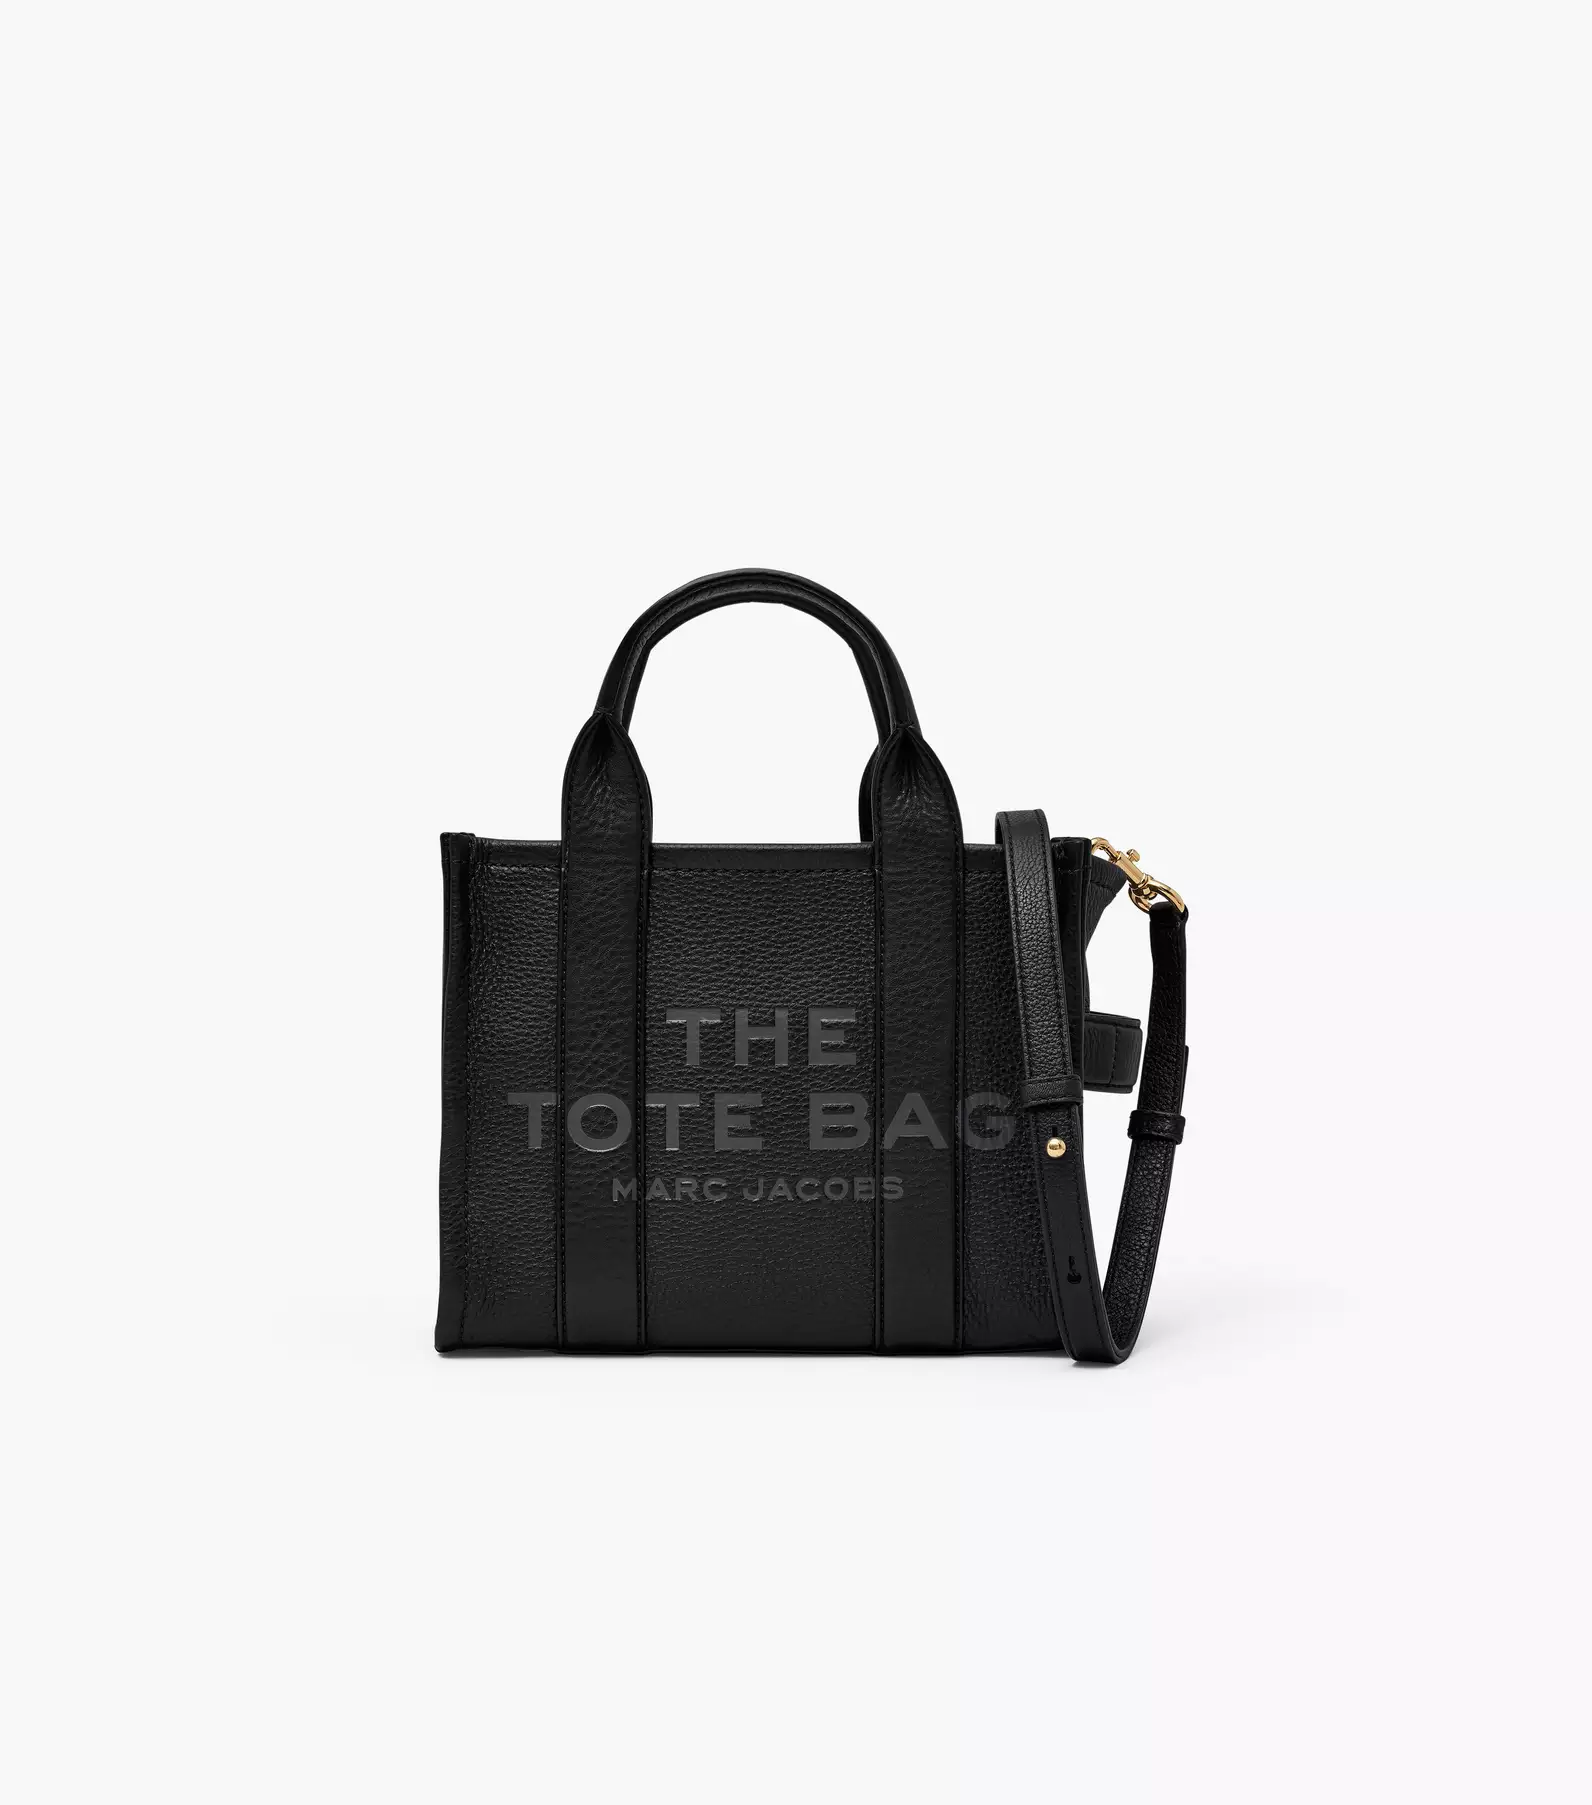 MARC JACOBS THE TOTE BAG ショルダーバッグ